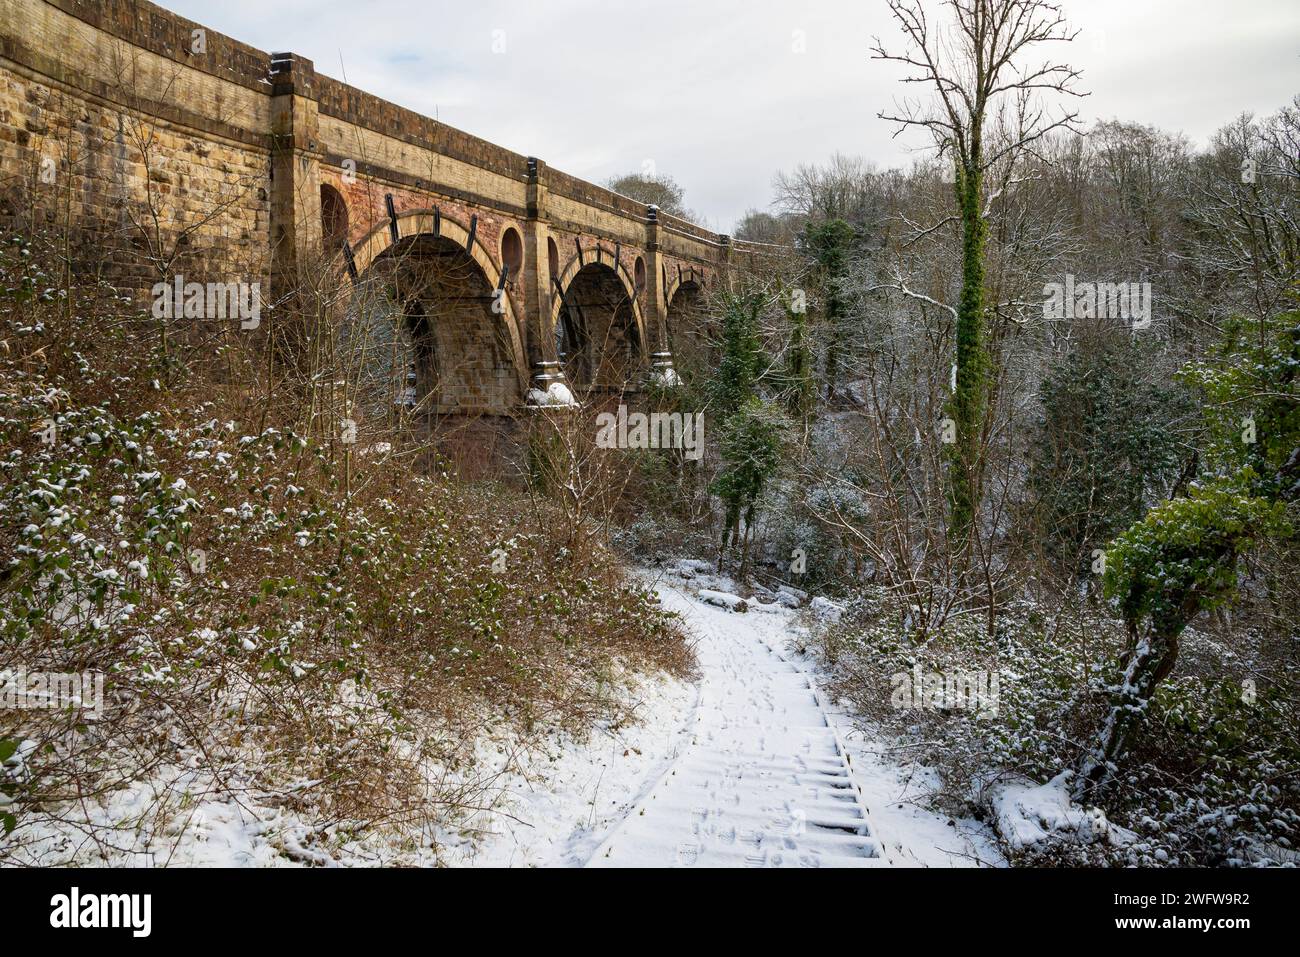 A snowy morning on the Peak Forest Canal at Marple, Stockport, Greater Manchester, England. View of the historic Marple Aquaduct. Stock Photo